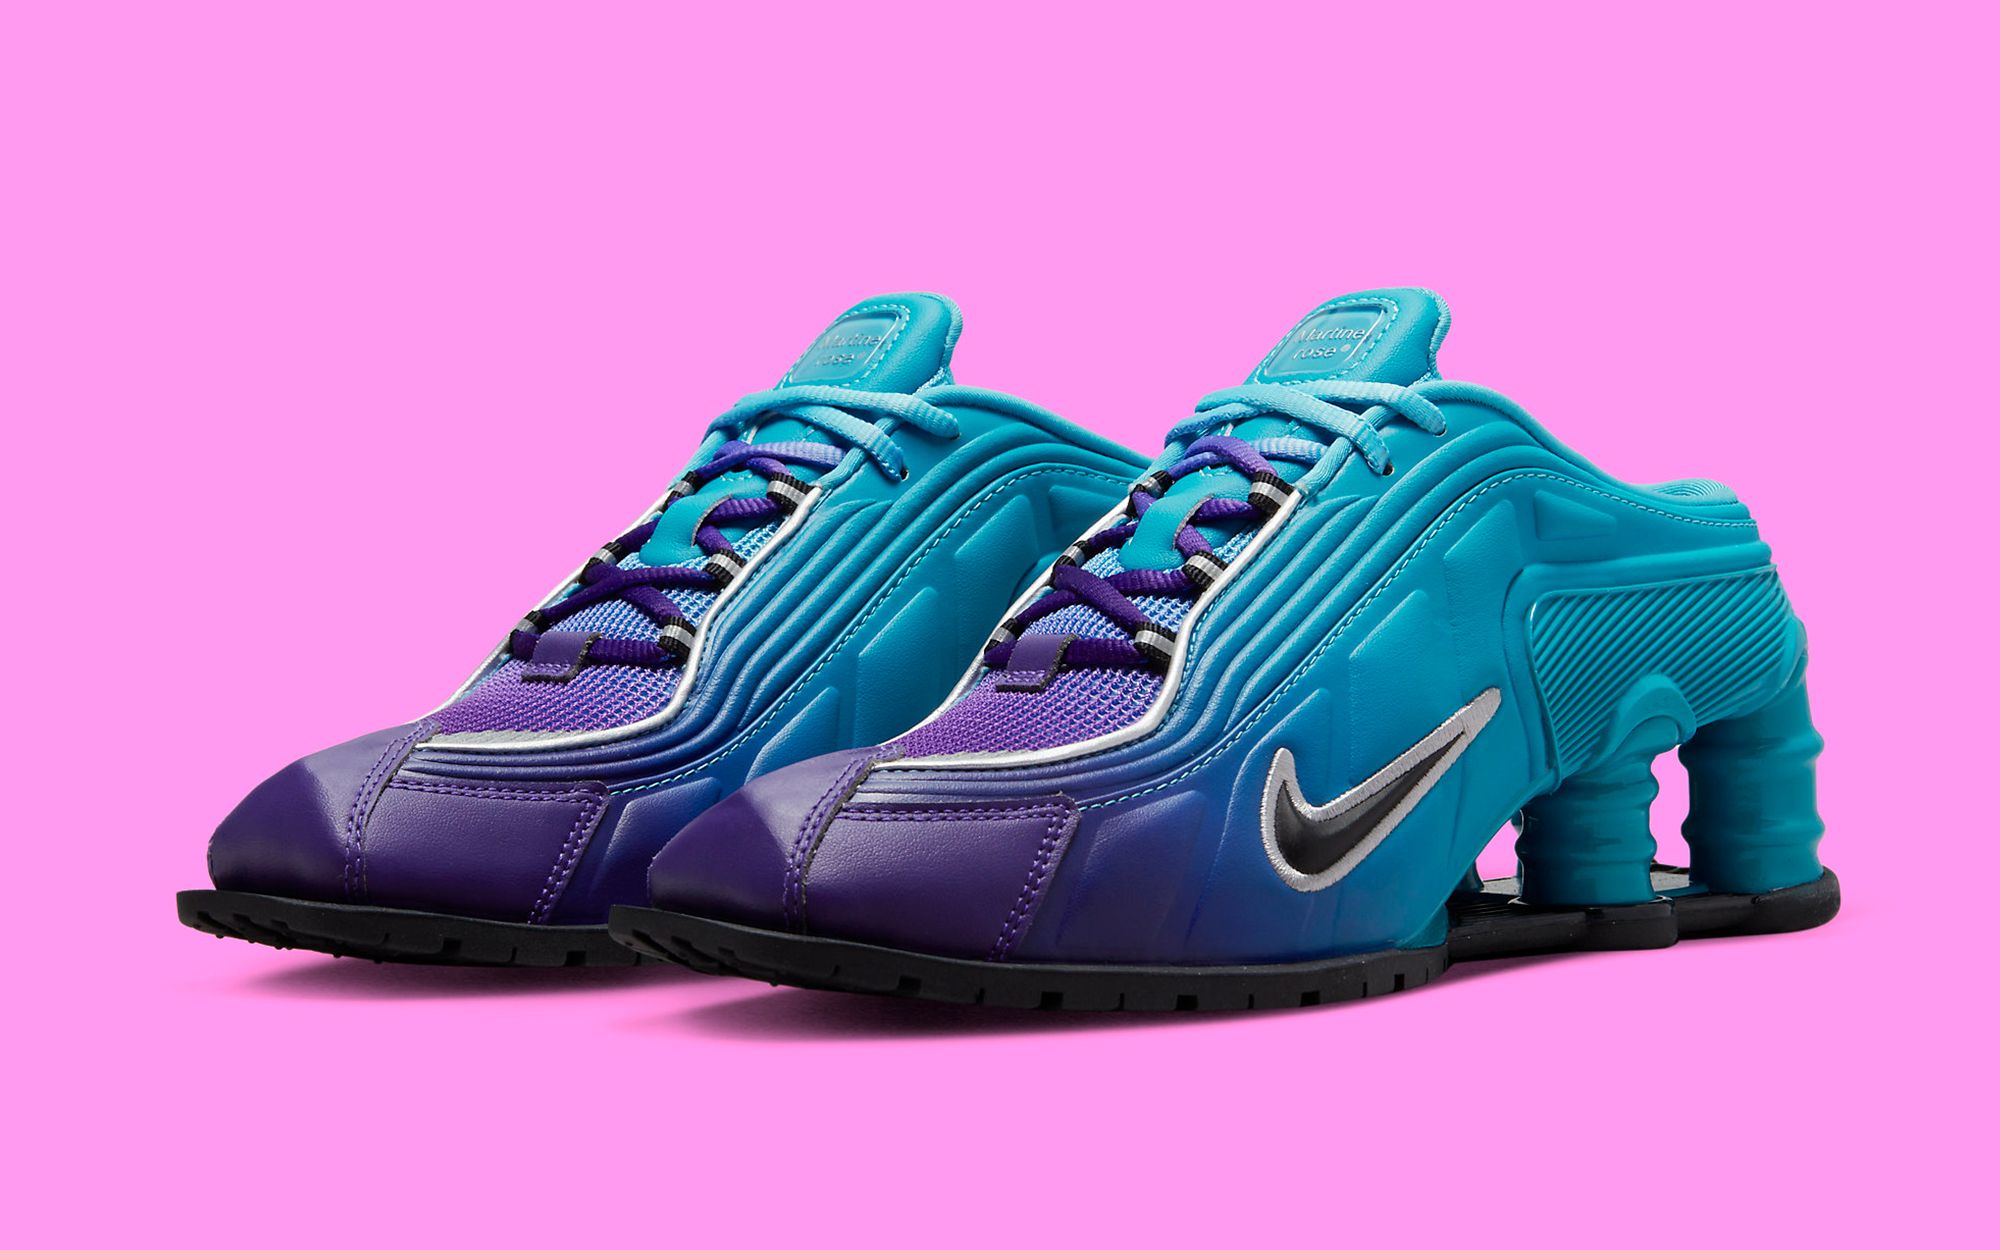 The Martine Rose x Nike Shox MR4 Collection Releases July 27